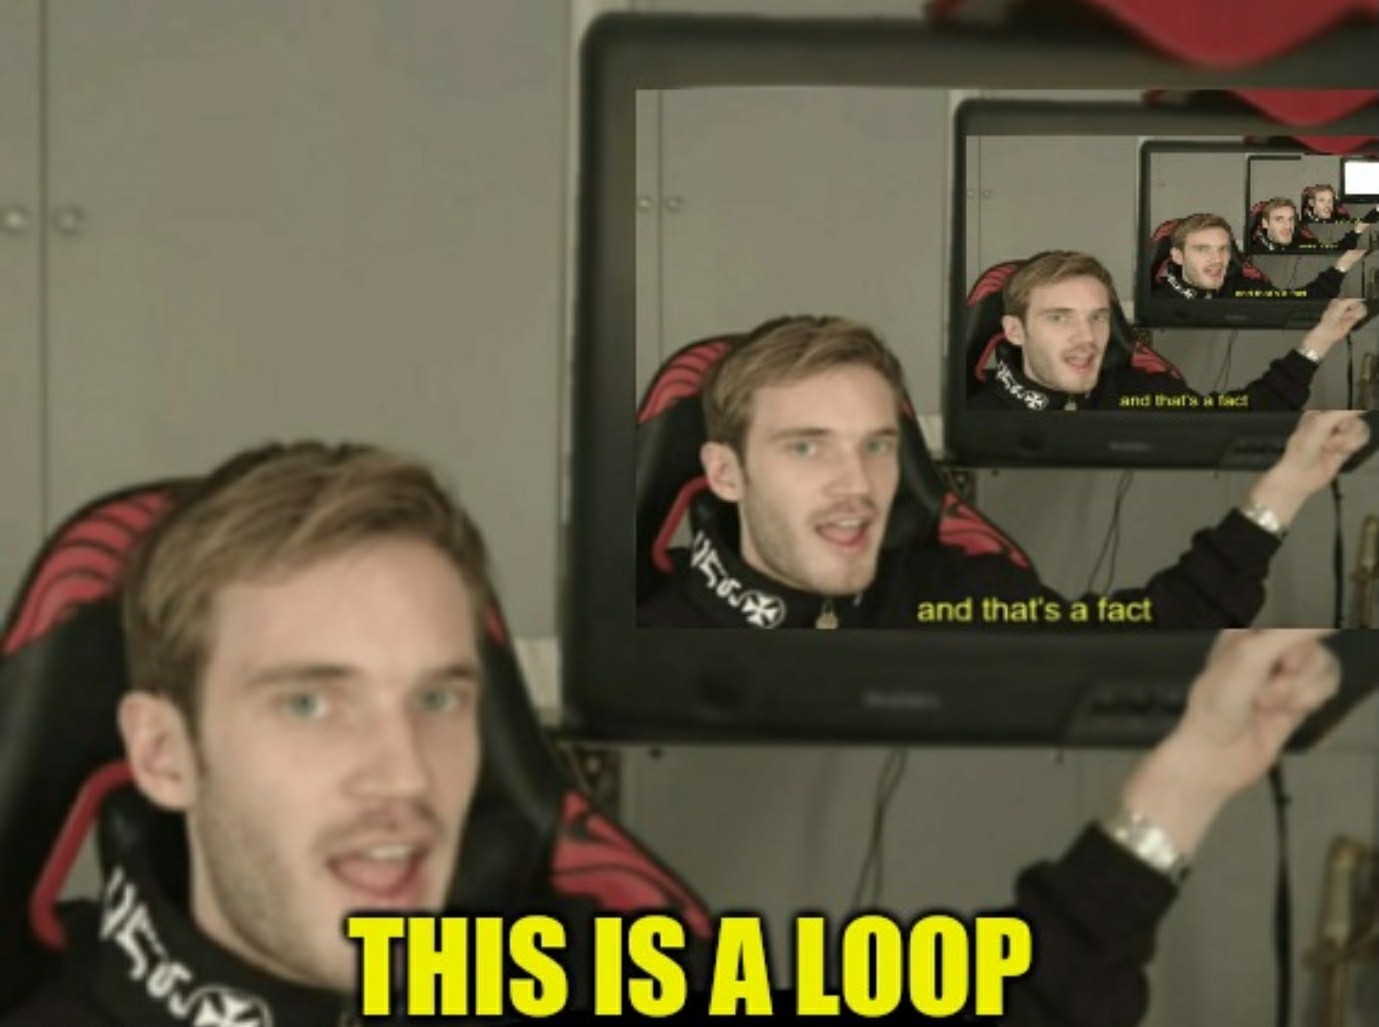 LOOP LOOP LOOP LOOP LOOP LOOP LOOP LOOP LOOP LOOP LOOP LOOP LOOP LOOP LOOP LOOP LOOP LOOP LOOP LOOP LOOP LOOP LOOP LOOP LOOP LOOP LOOP LOOP LOOP LOOP LOOP. You are a man of sheer fucking will if you got here - meme